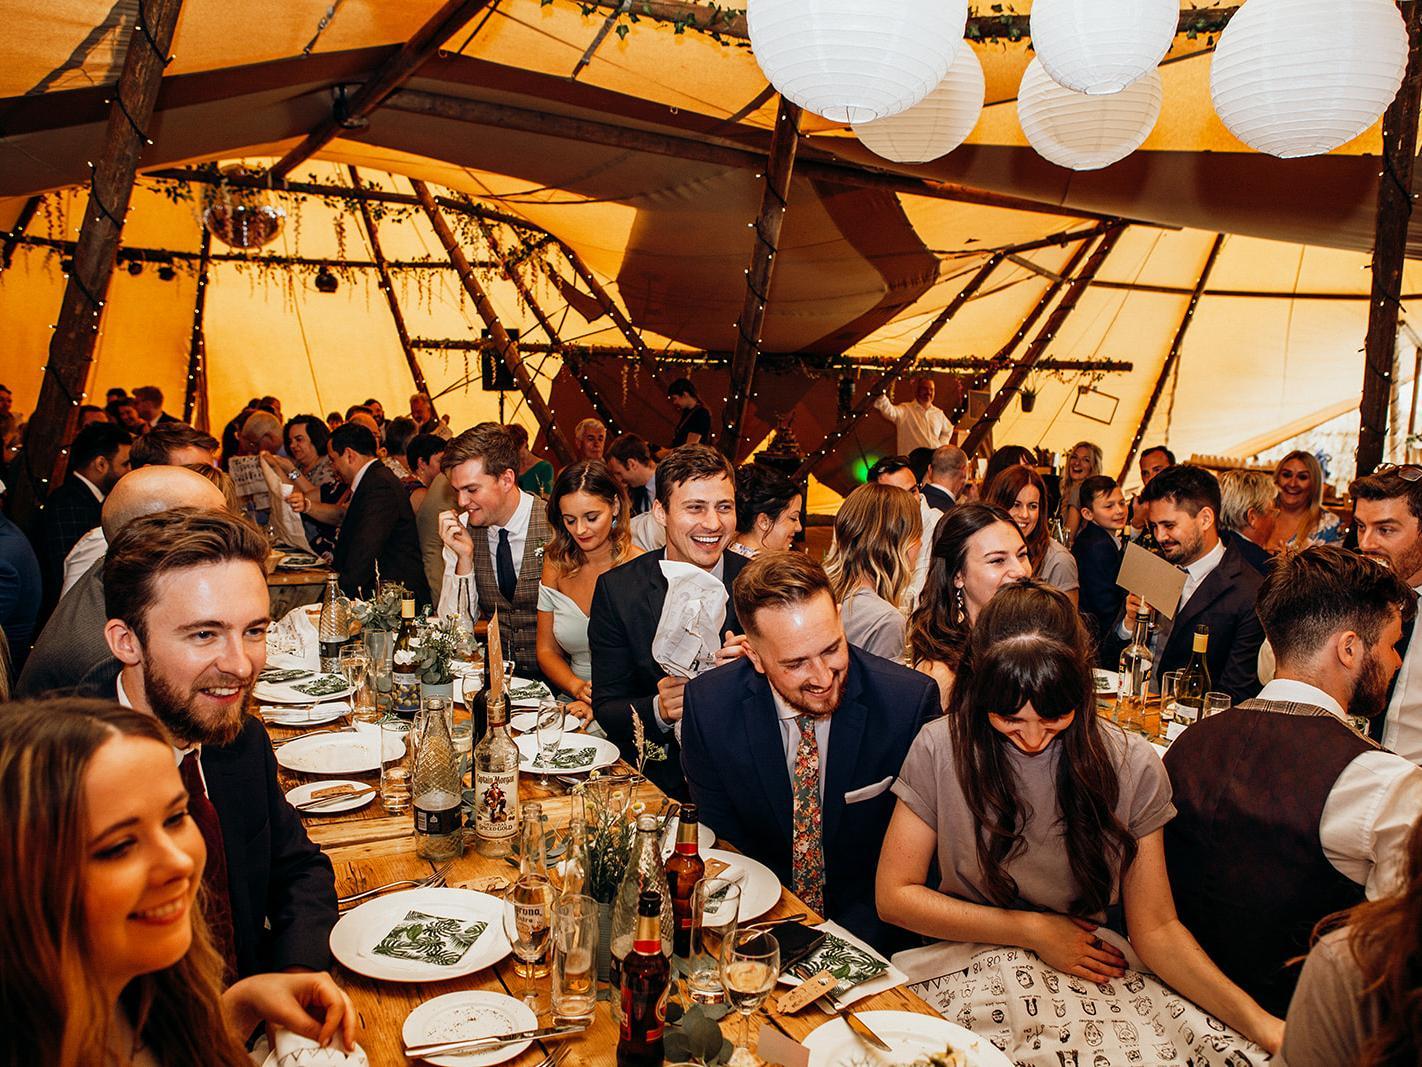 Nordic micro-festival will bring an enchanted giant tipi village set within an immersive pop-up forest for a Christmas 'do' in a winter paradise. The festival geodome is in the city from Dec 5 to Dec 7 and Dec 12 to Dec 14